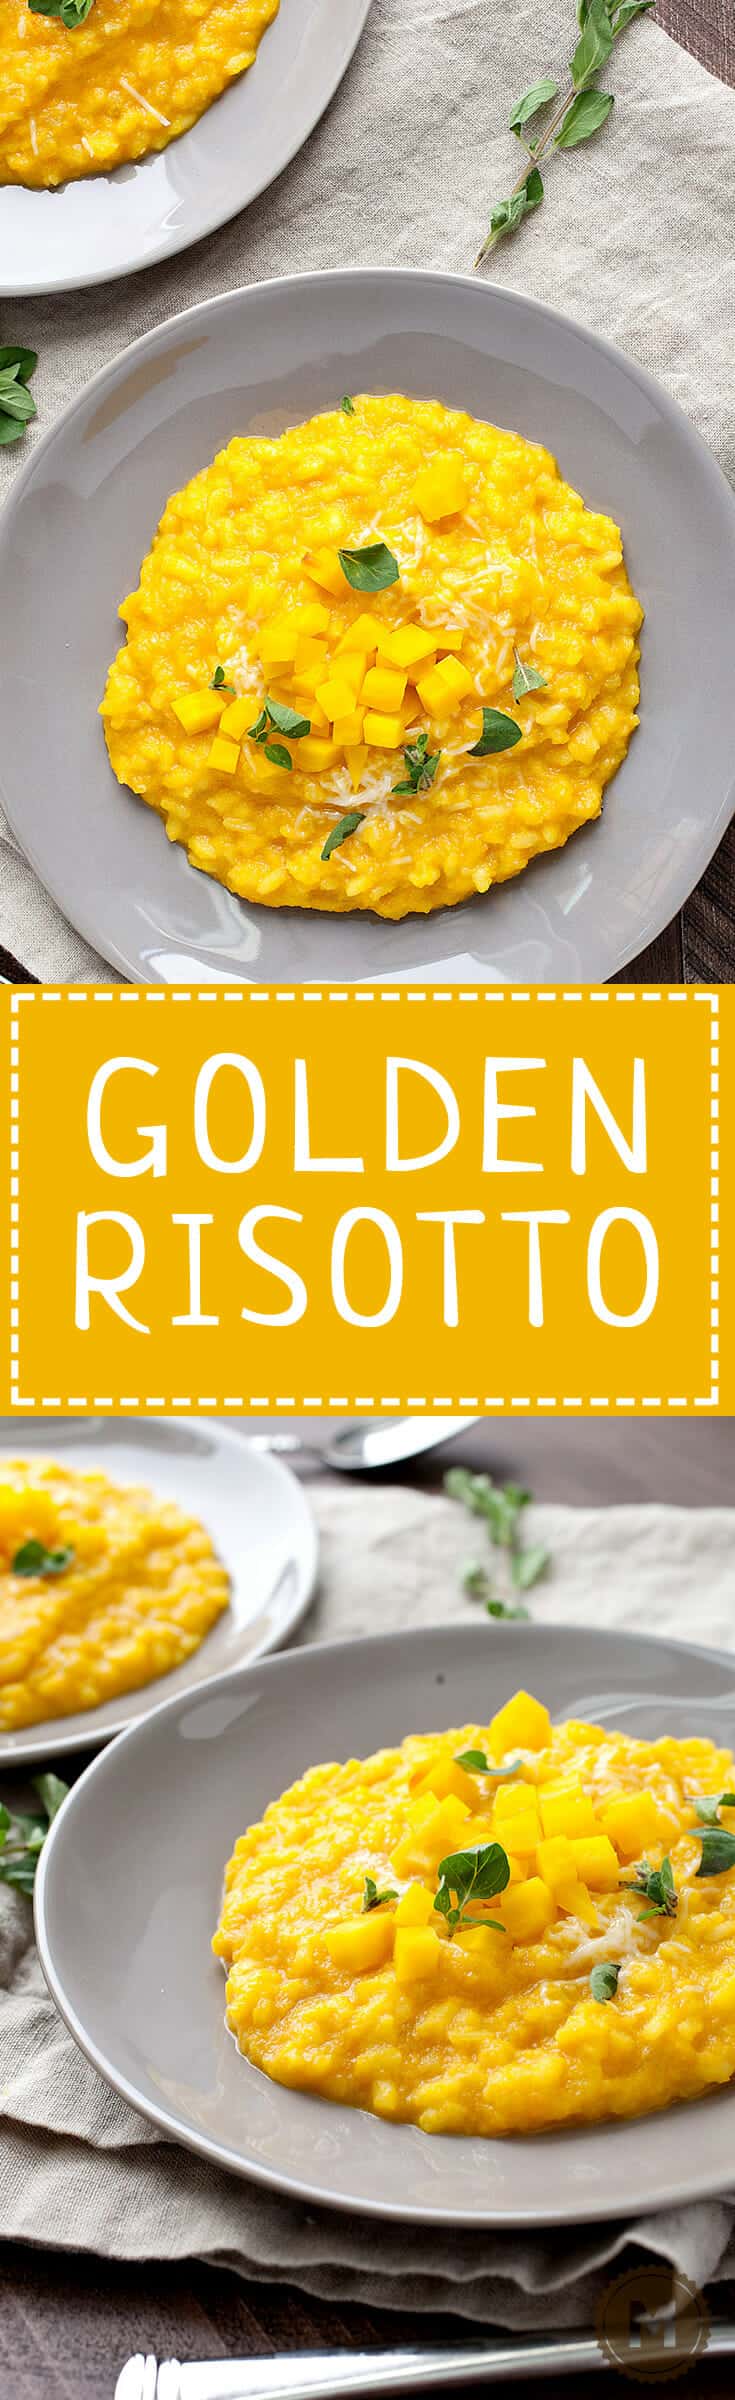 Creamy Golden Risotto: This colorful bright risotto is mixed with beets and carrots. The root veggies give the risotto a nice sweetness and beautiful color. How could you not want a big bowl of this stuff?! | macheesmo.com